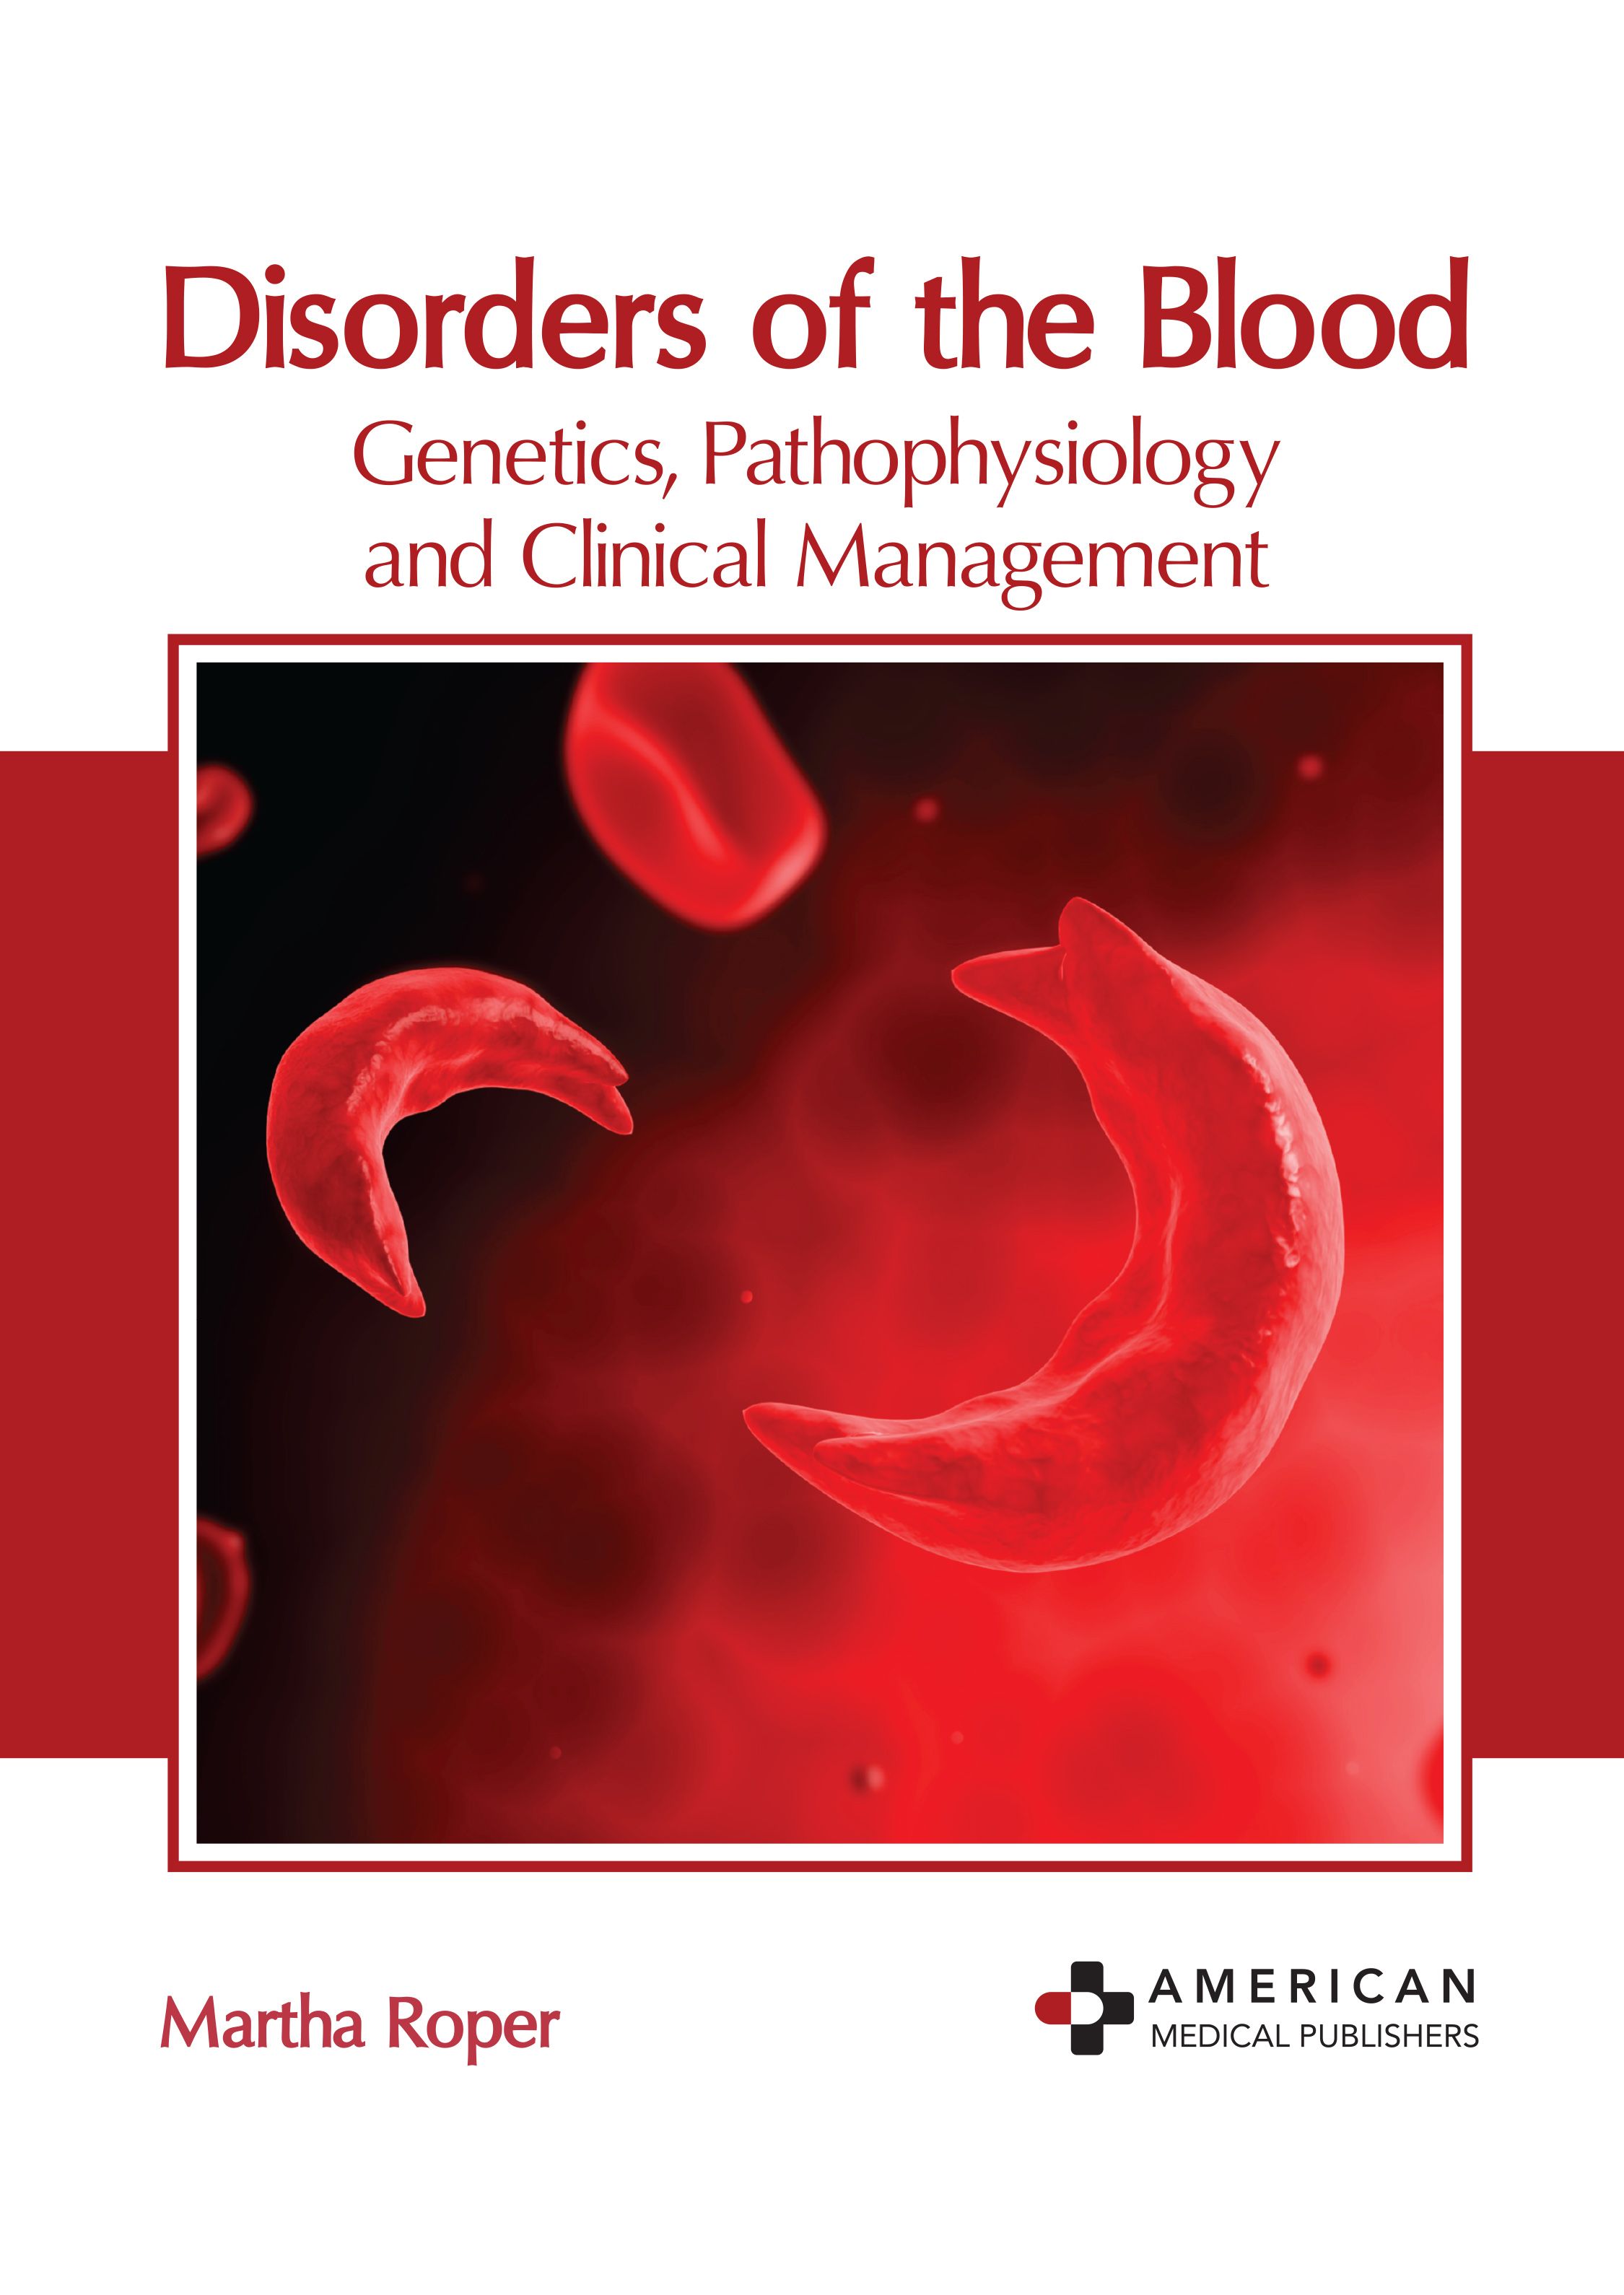 DISORDERS OF THE BLOOD: GENETICS, PATHOPHYSIOLOGY AND CLINICAL MANAGEMENT